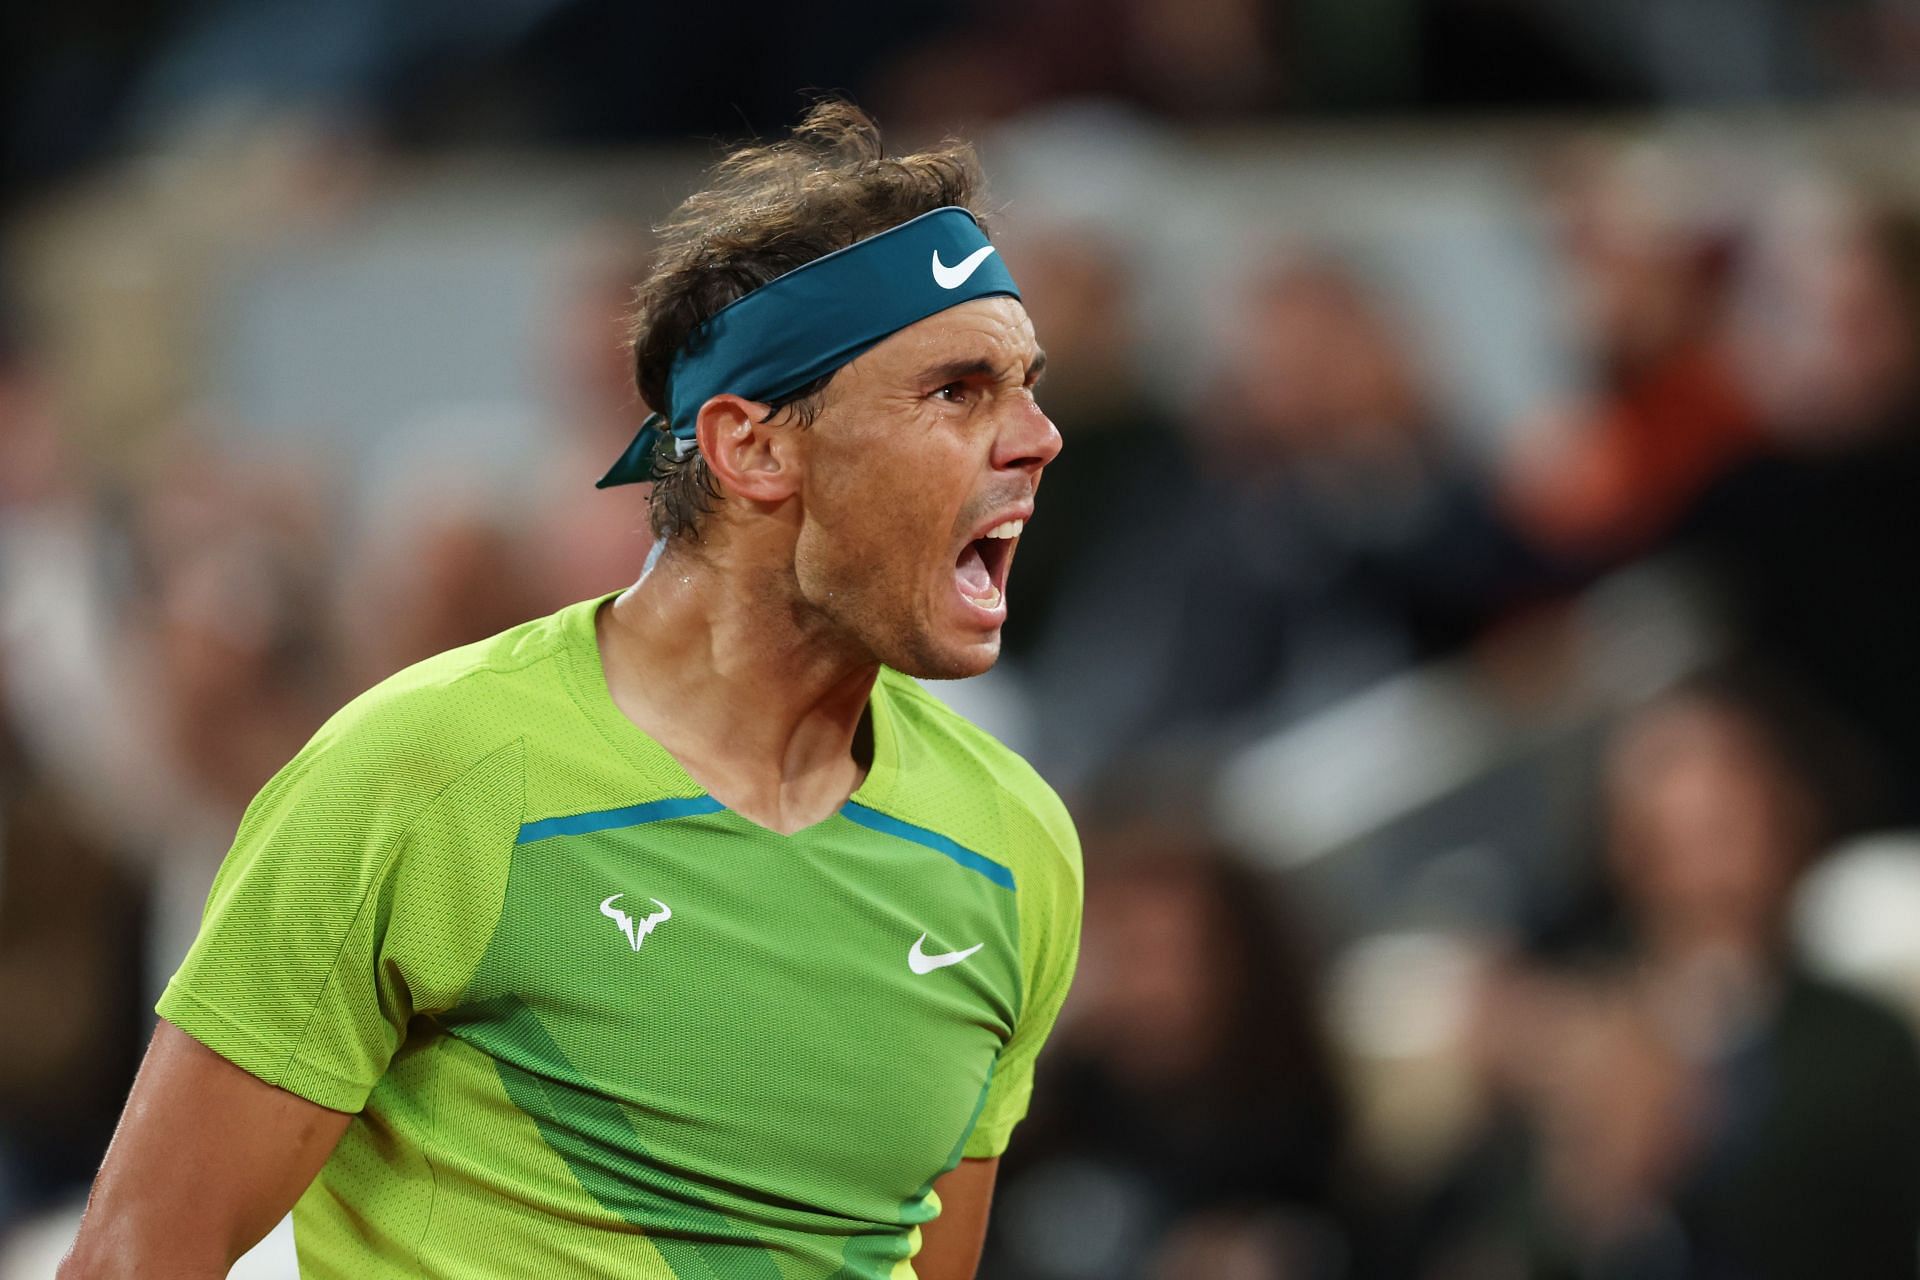 Rafael Nadal squares off against Alexander Zverev in the semifinals of the 2022 French Open